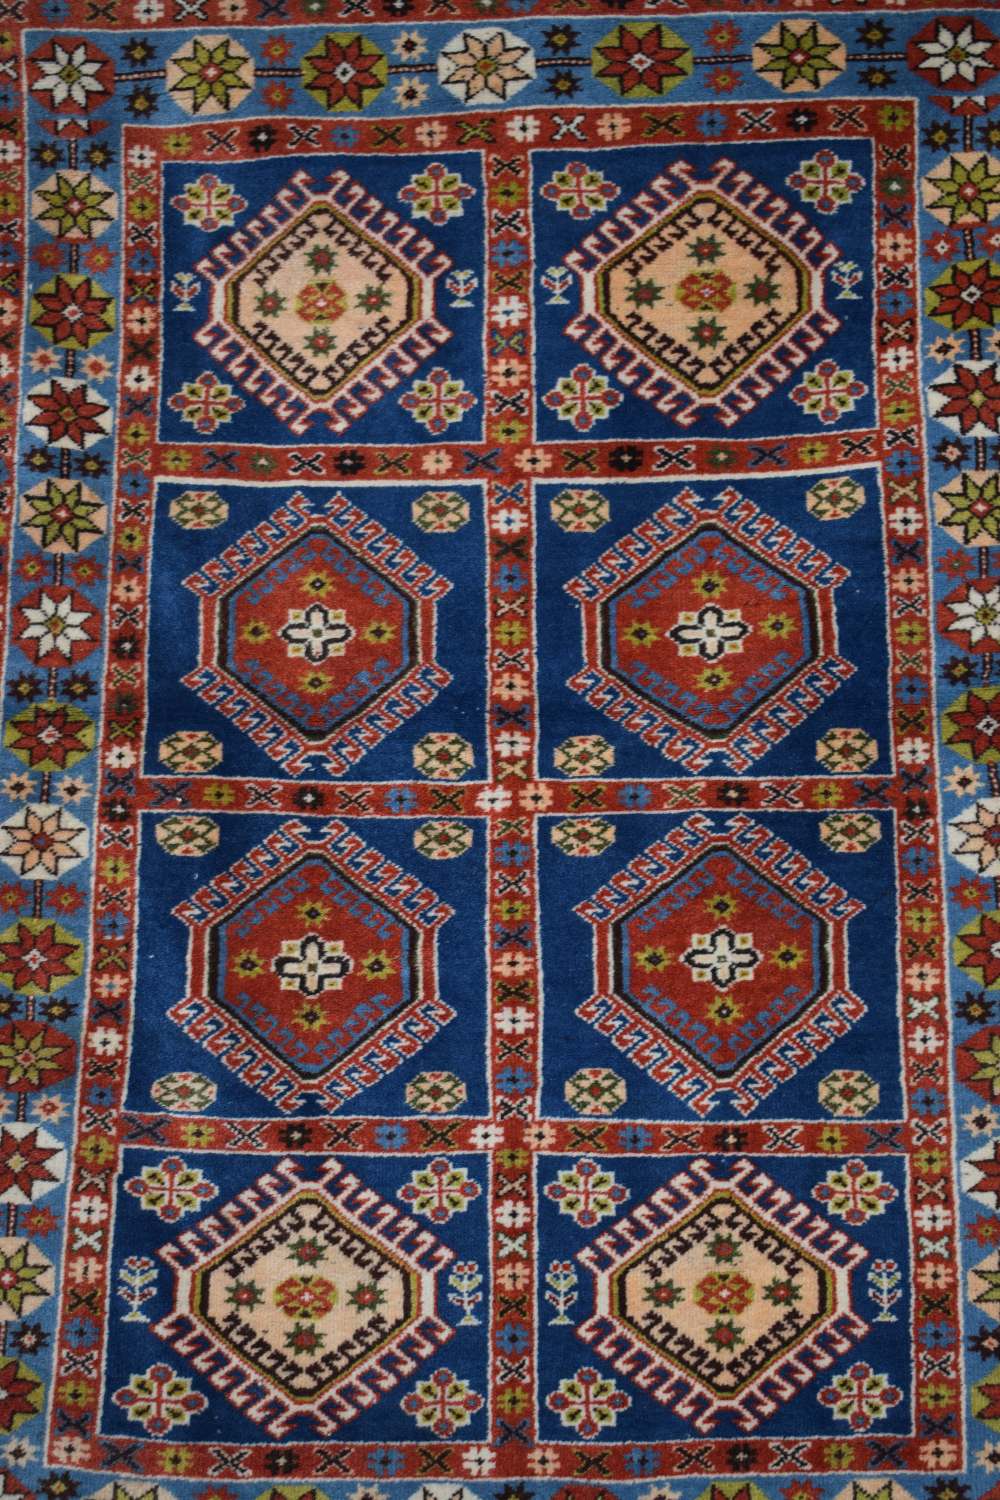 Yalameh compartment rug, south west Persia, circa 1930s; 4ft. 10in. x 3ft. 6in. 1.47m. x 1.07m. - Image 7 of 8